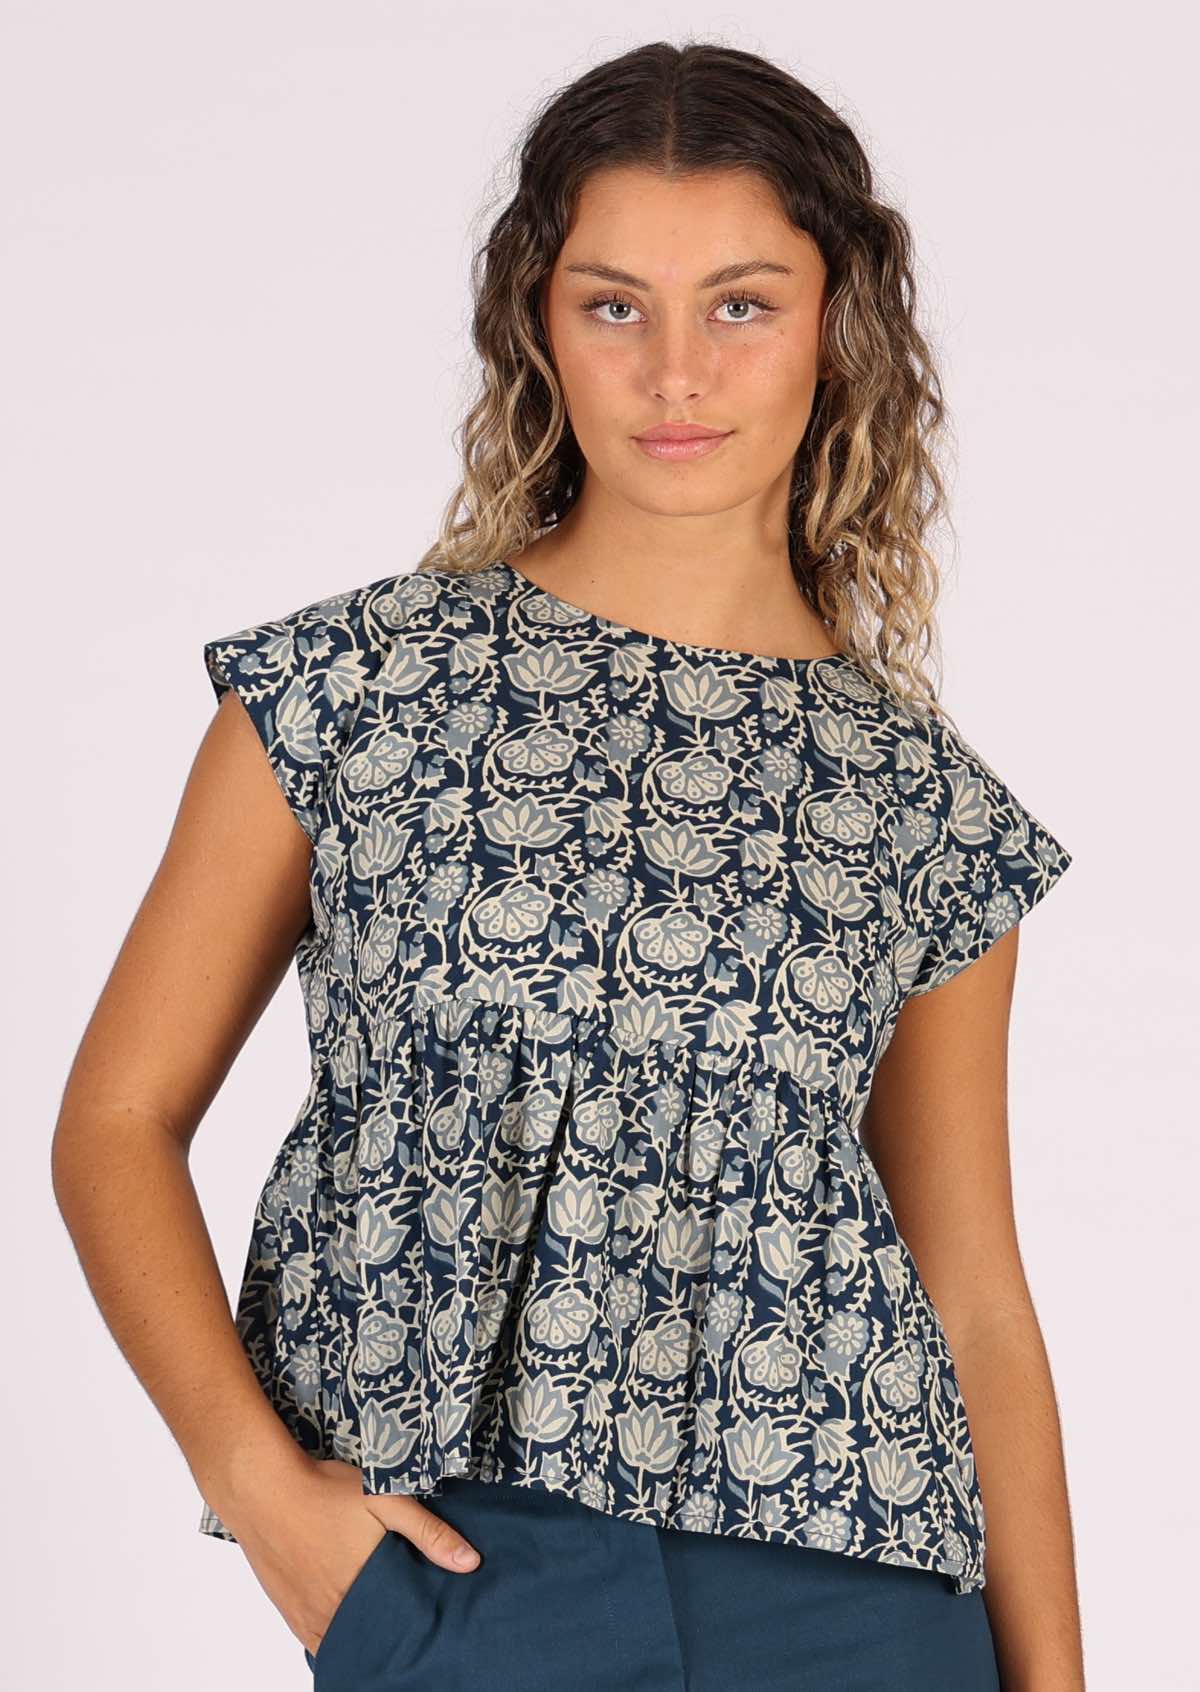 Blue floral print cotton top with ruffle